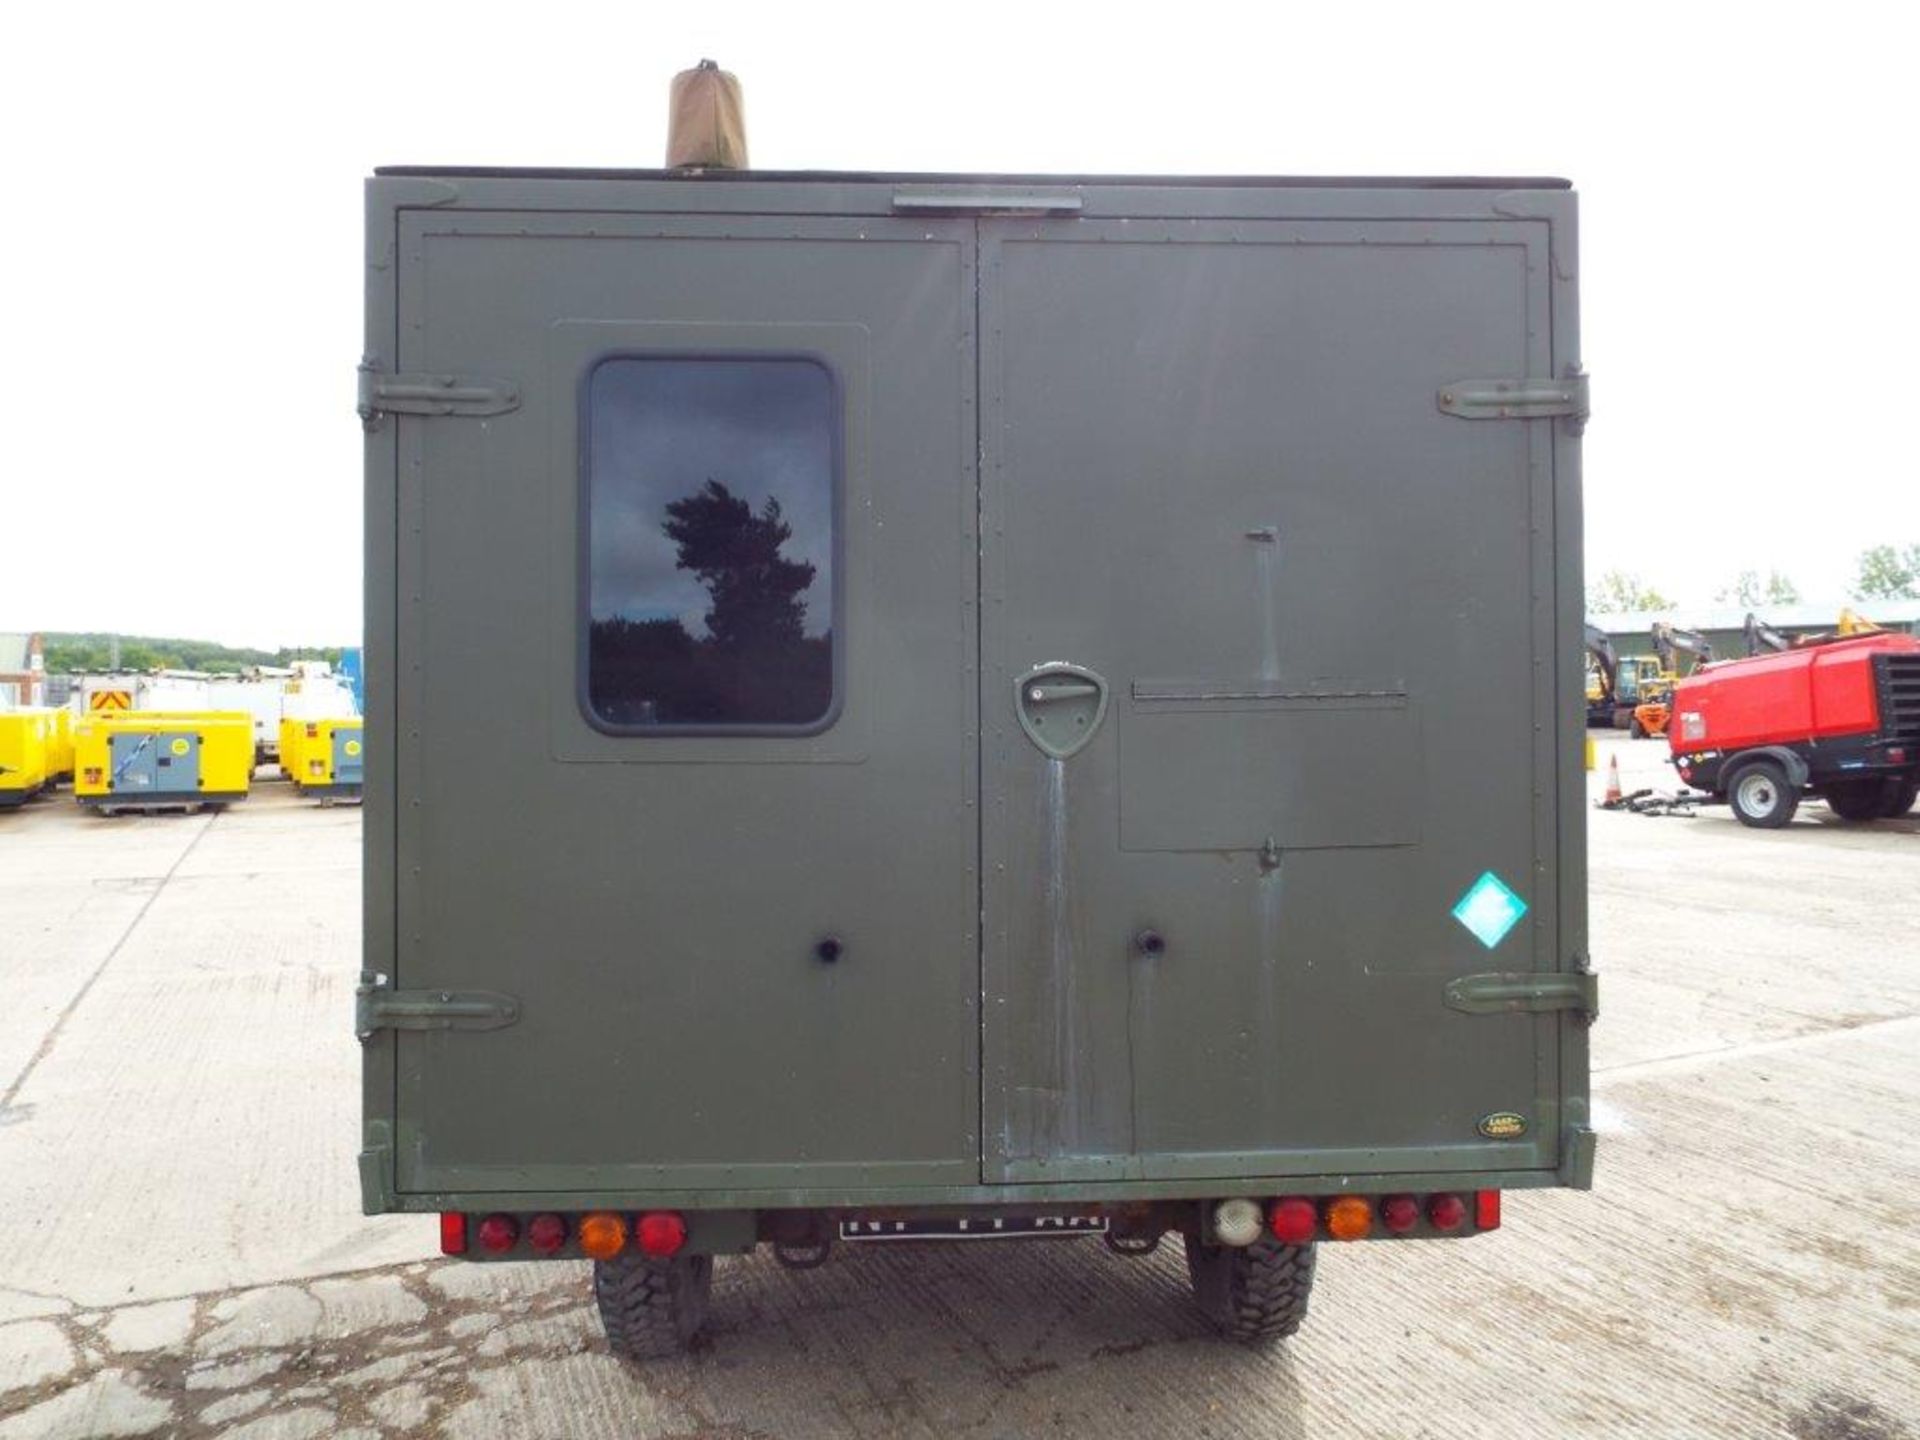 Military Specification Land Rover Wolf 130 Ambulance - Image 6 of 24